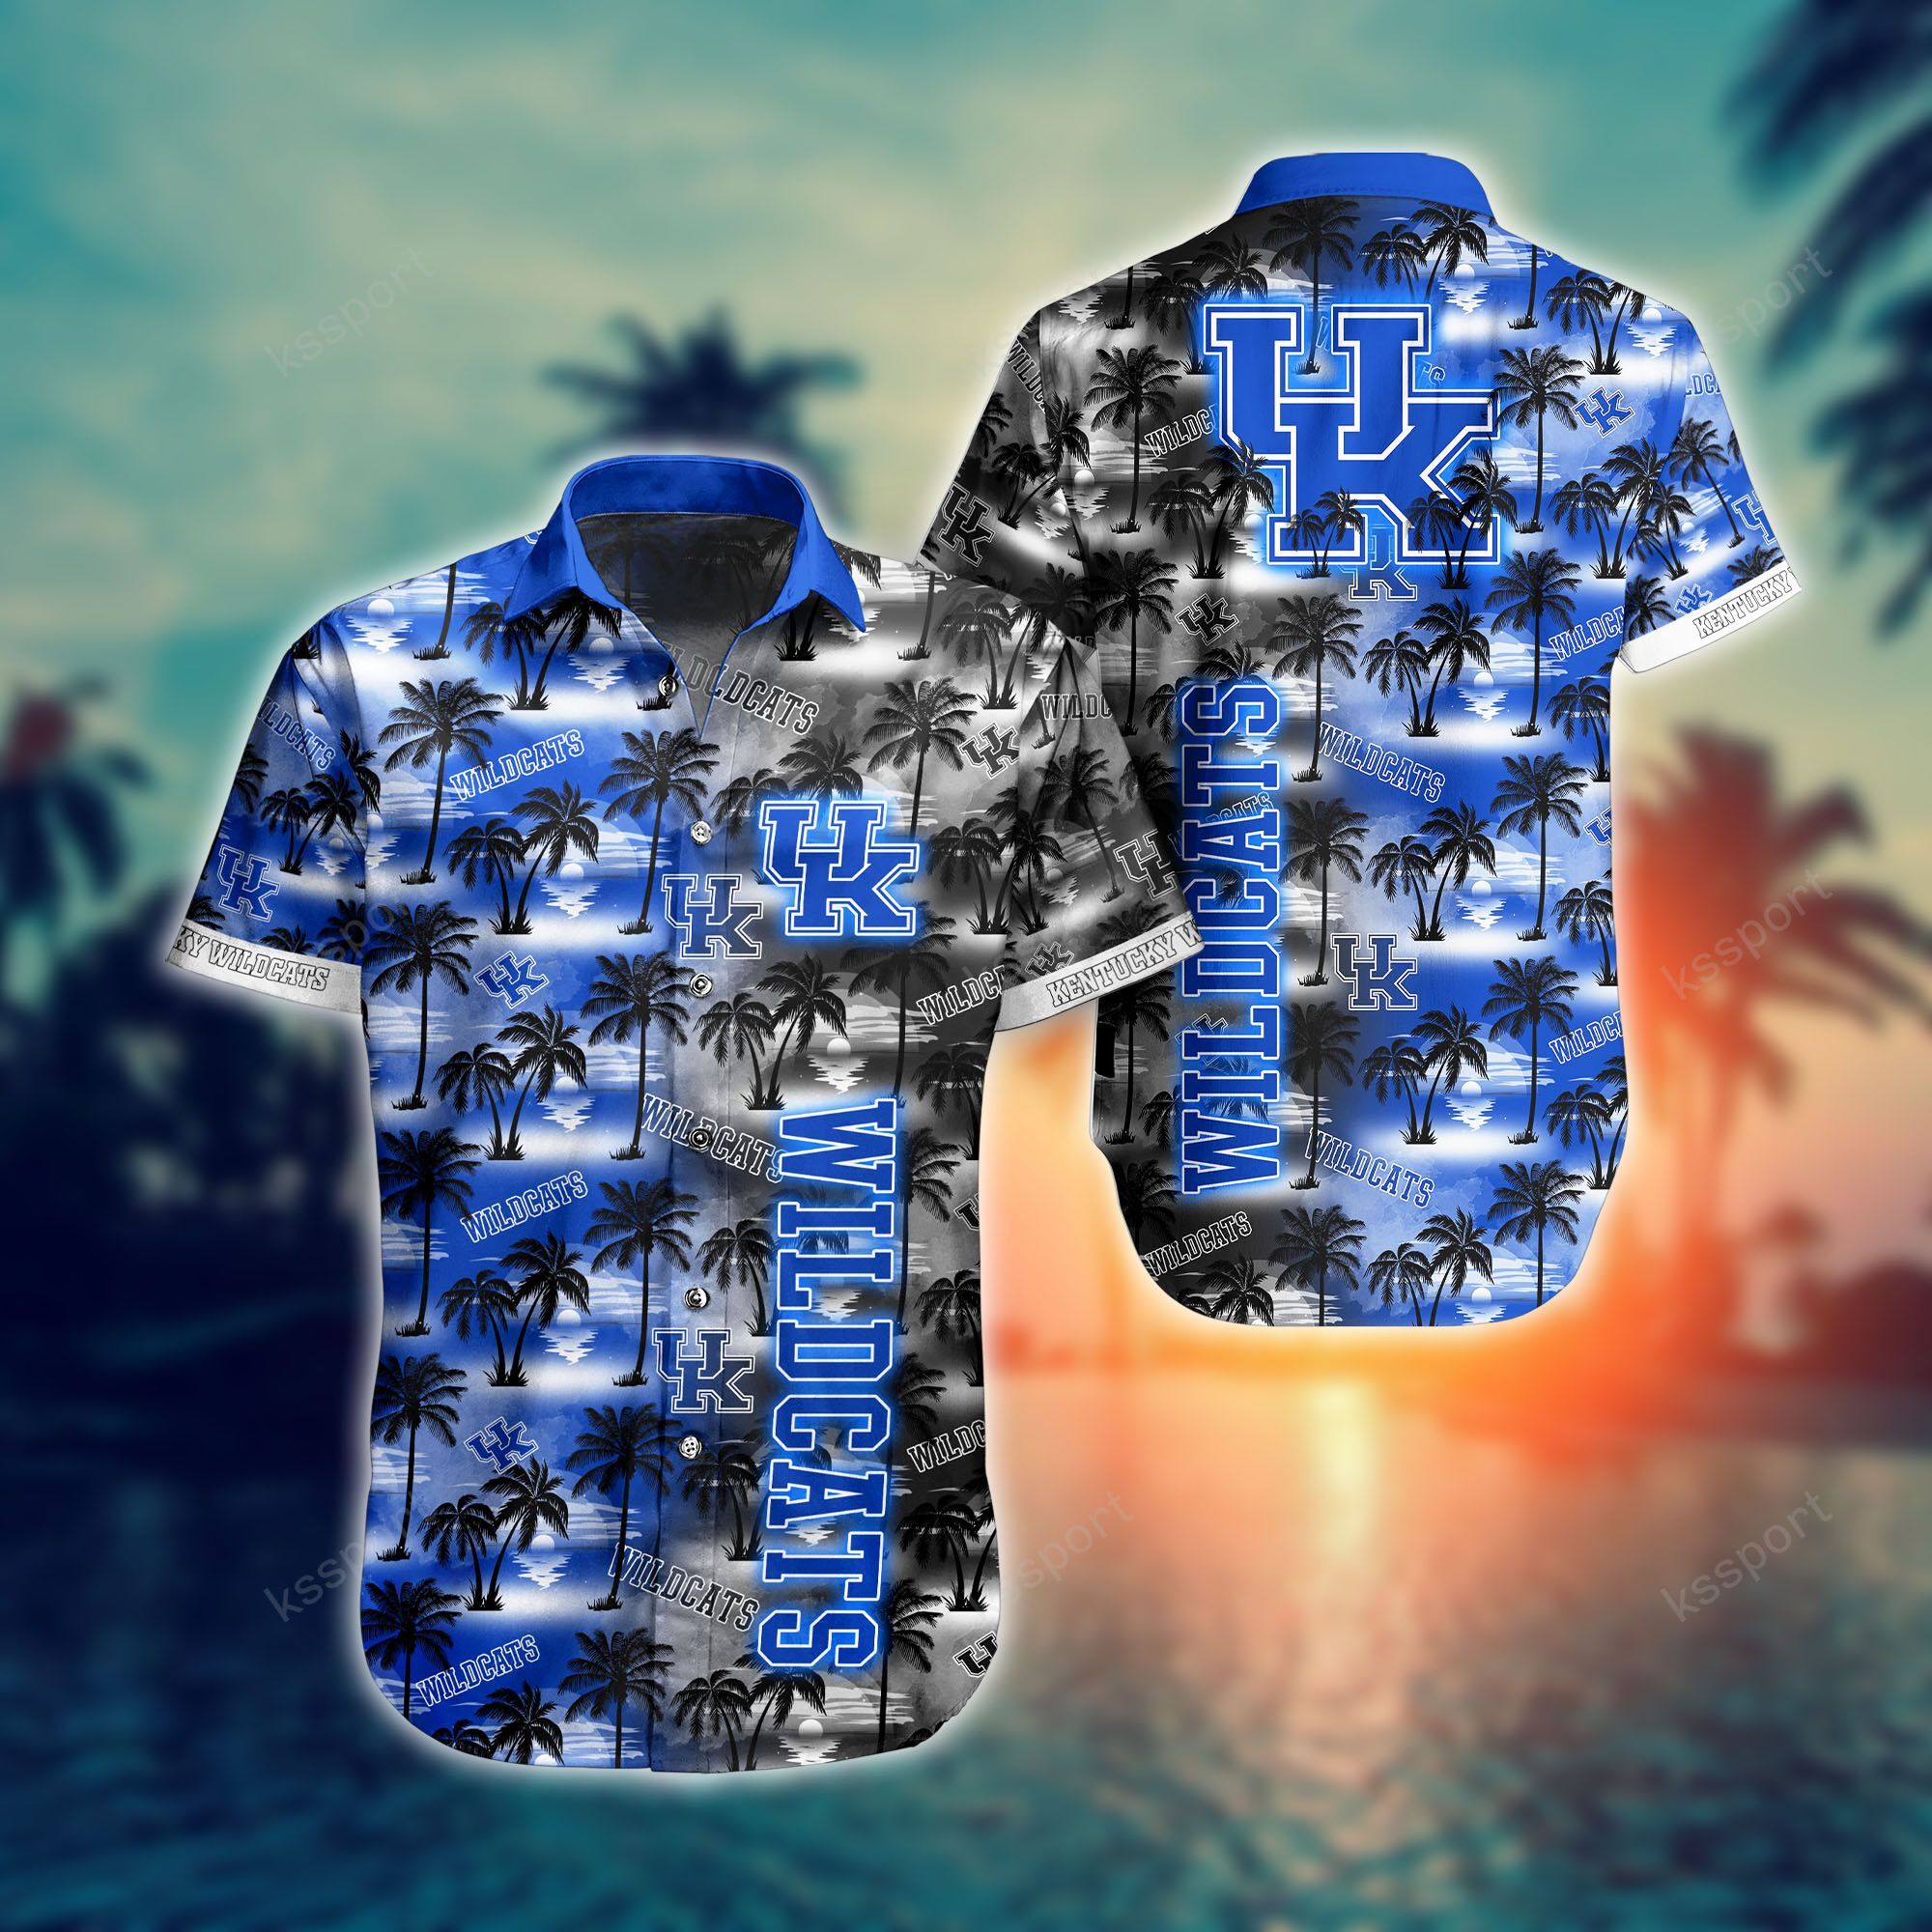 Treat yourself to a cool Hawaiian set today! 29